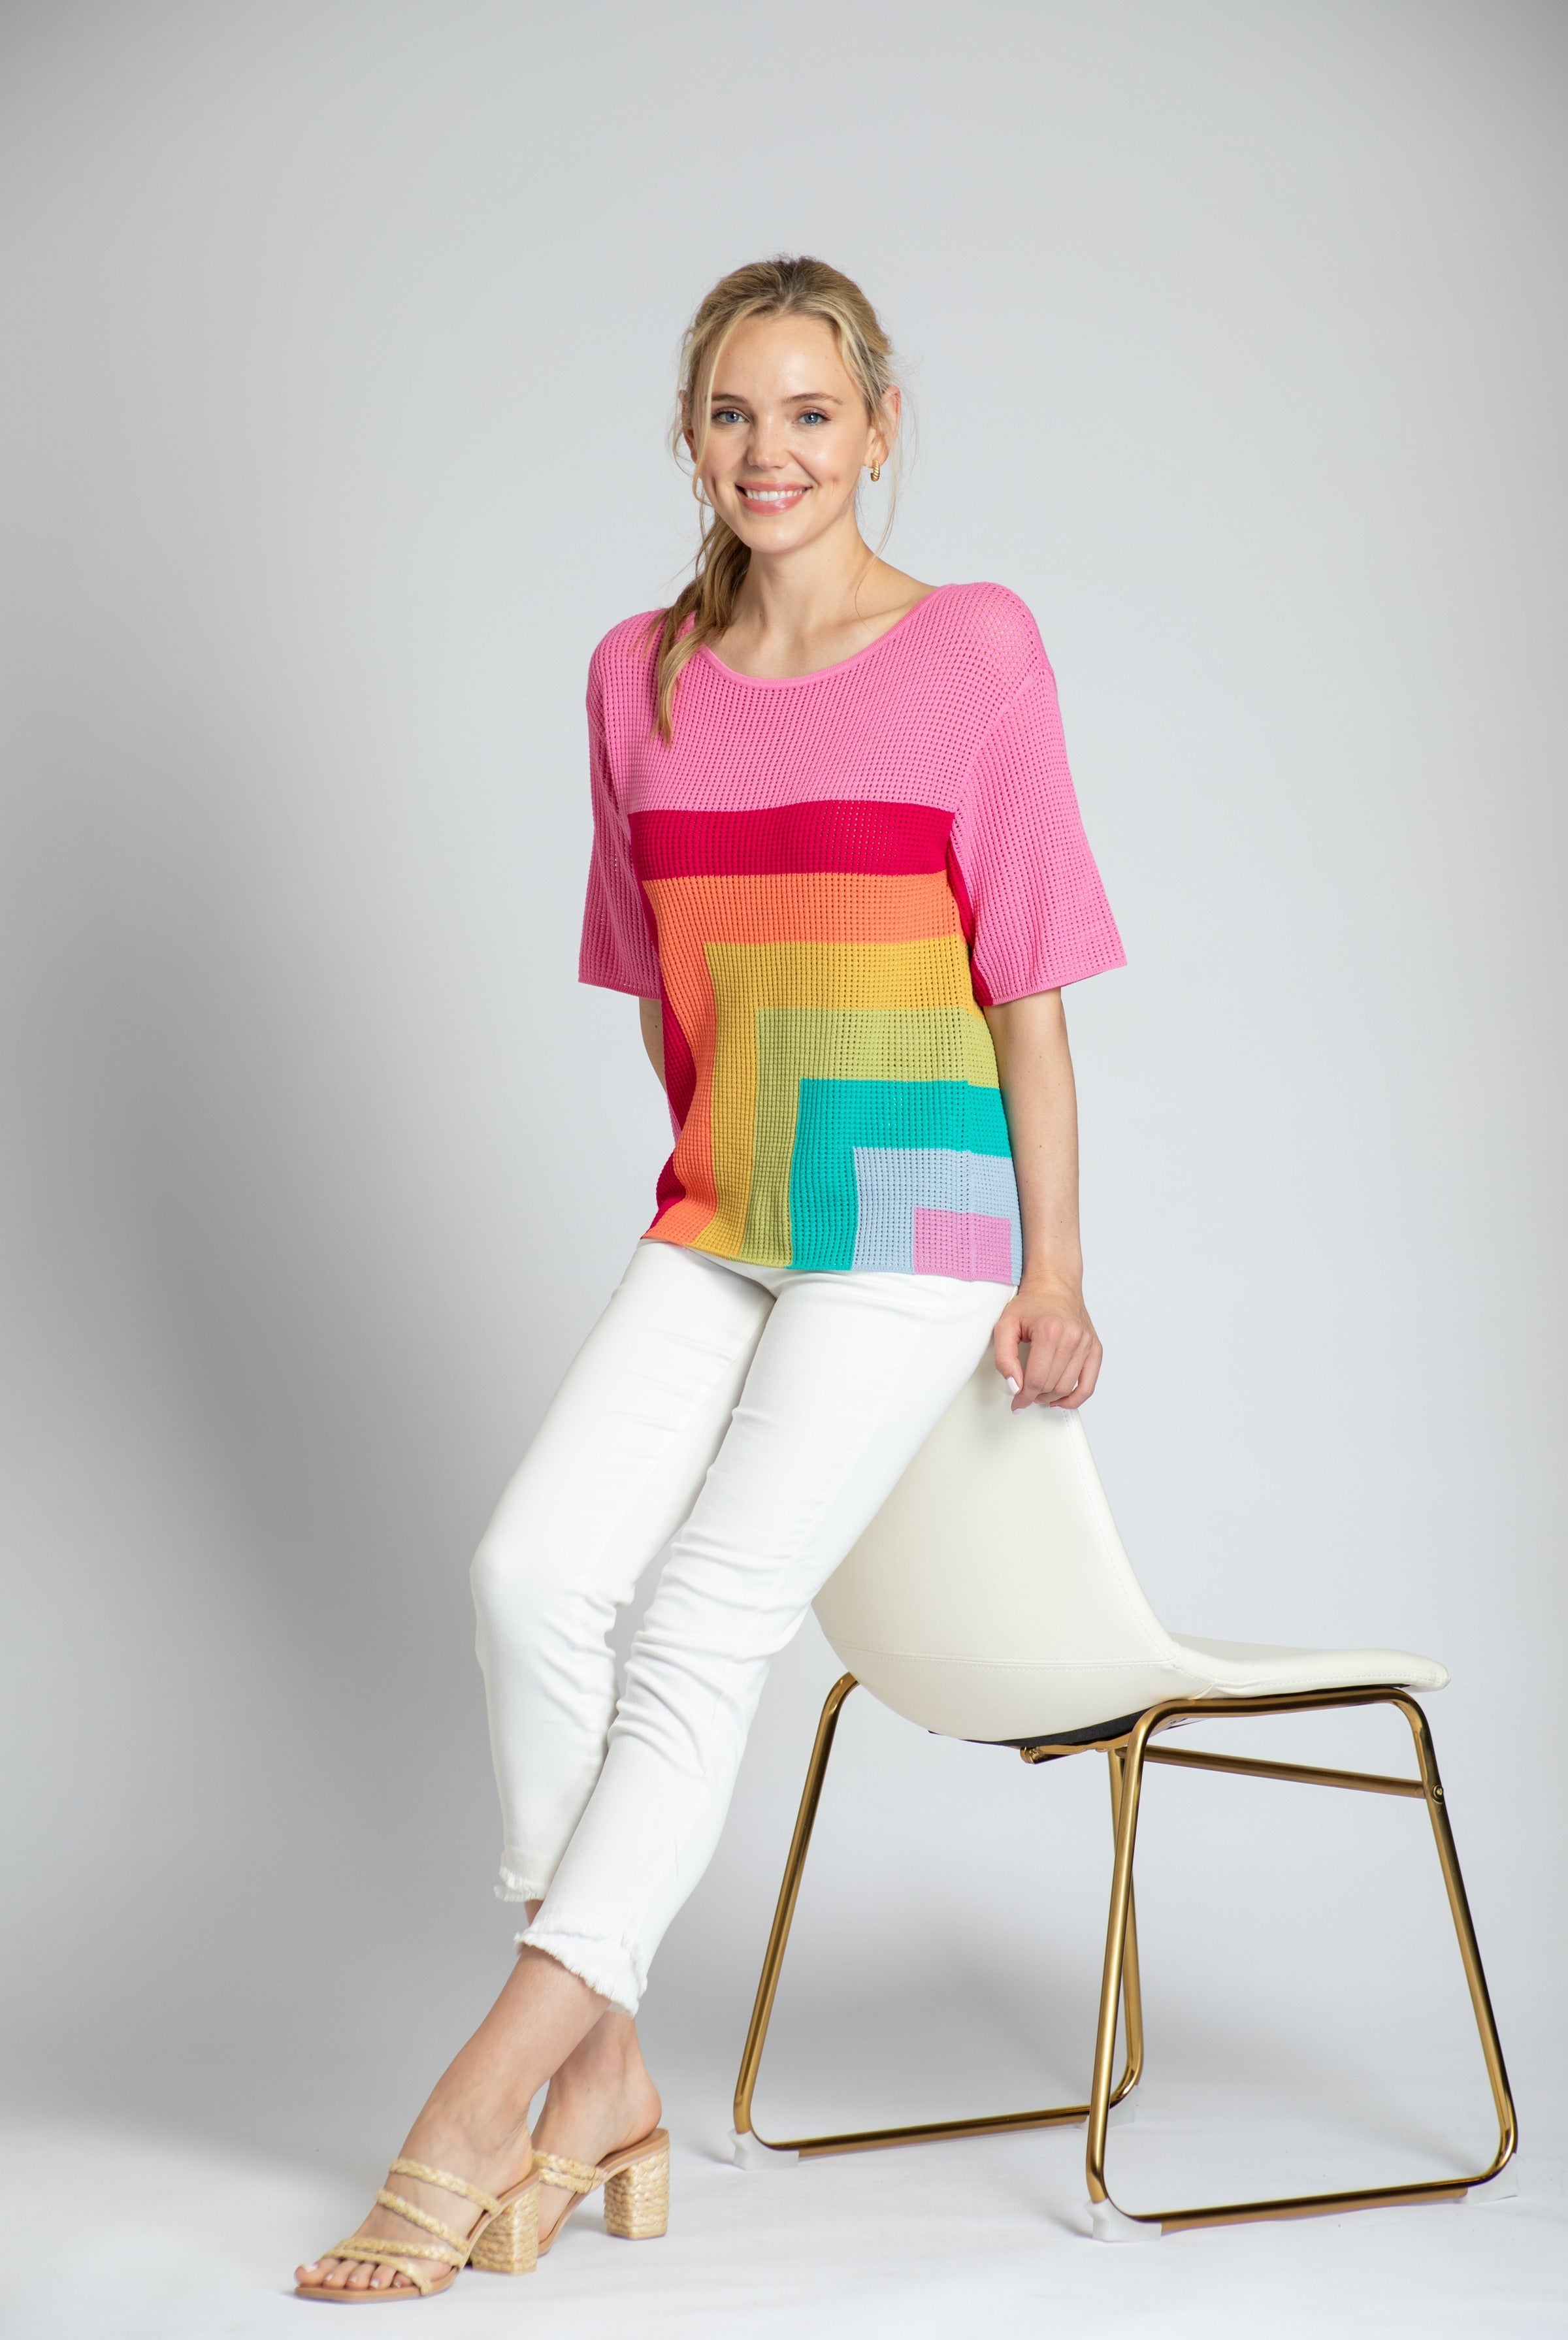 Color Block Open Knit Sweater